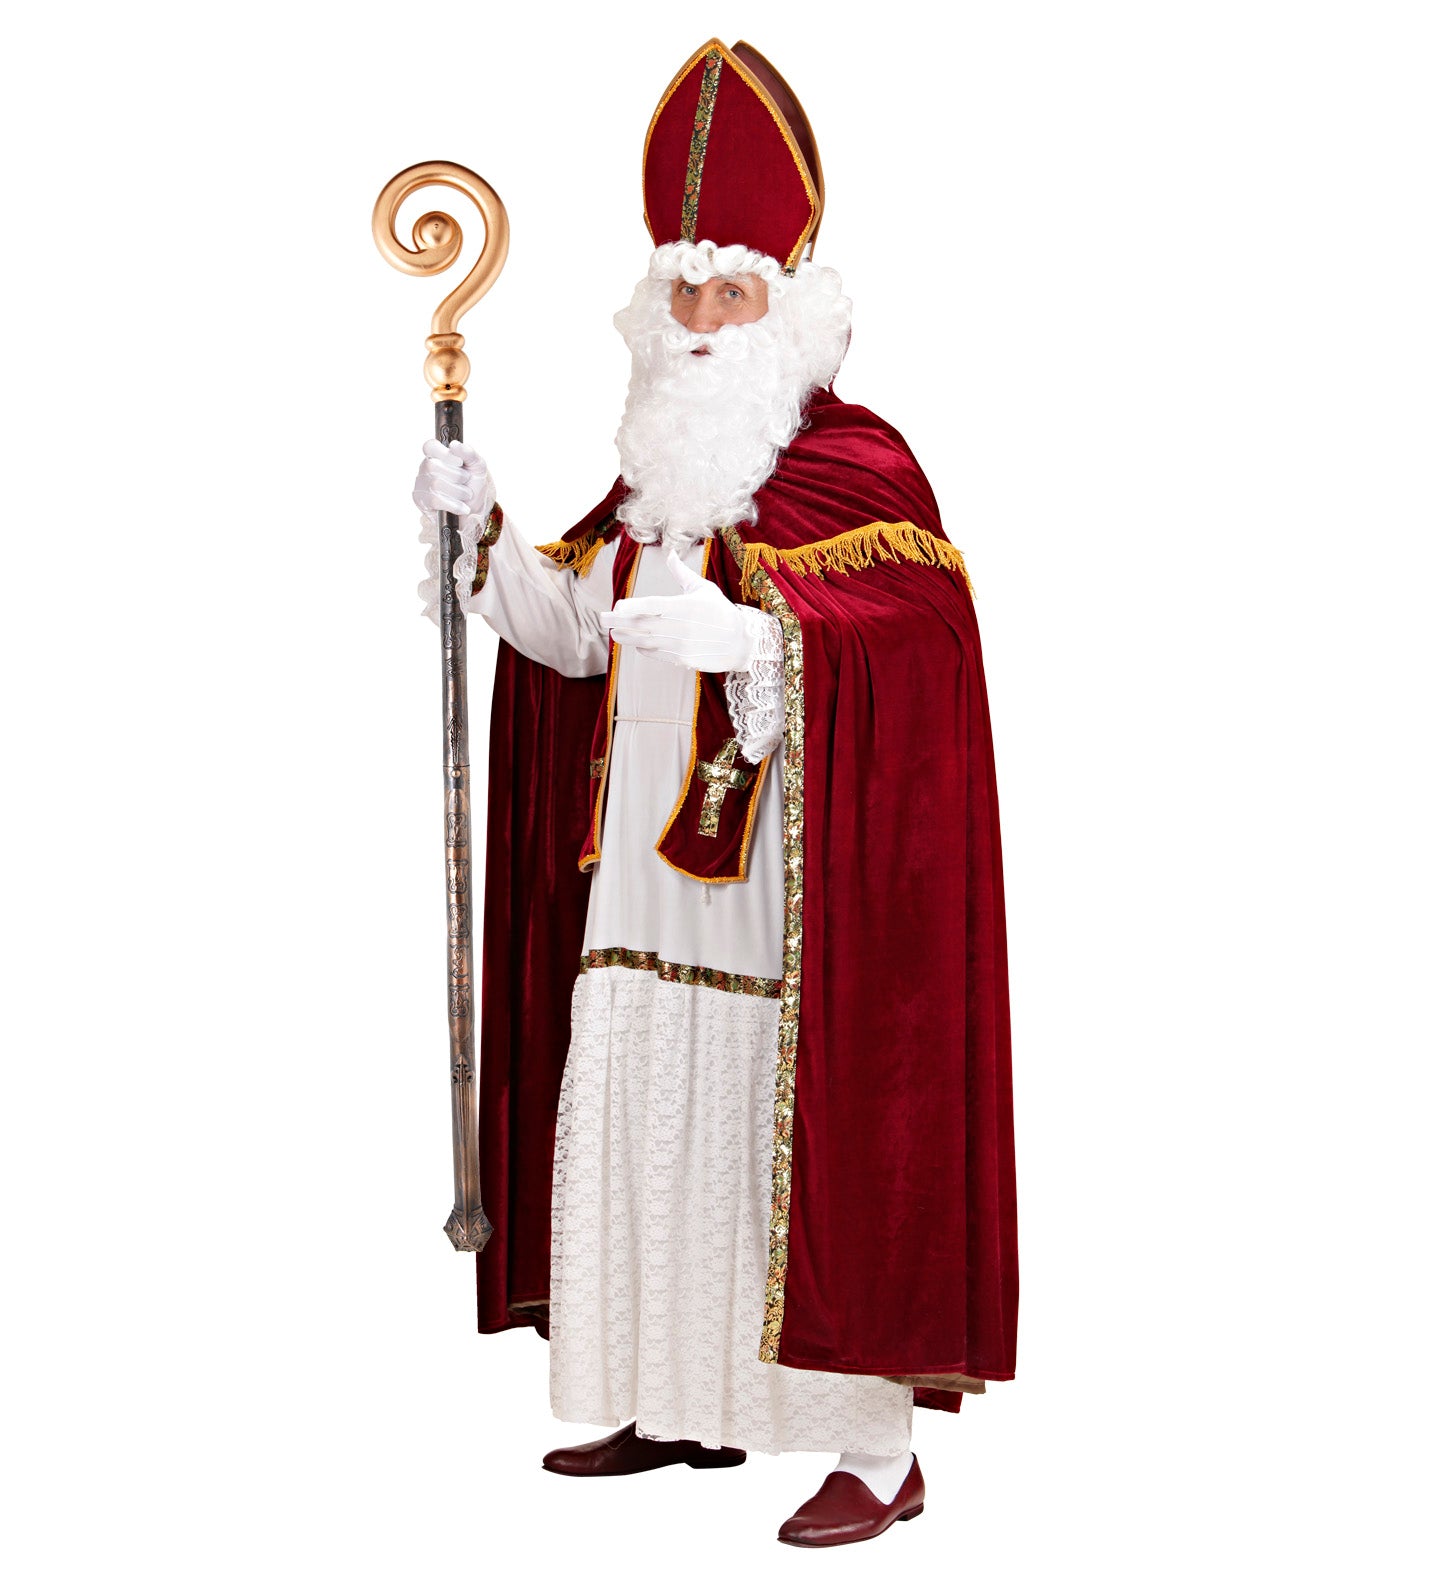 Crozier Staff for St Patrick or Nicholas costumes